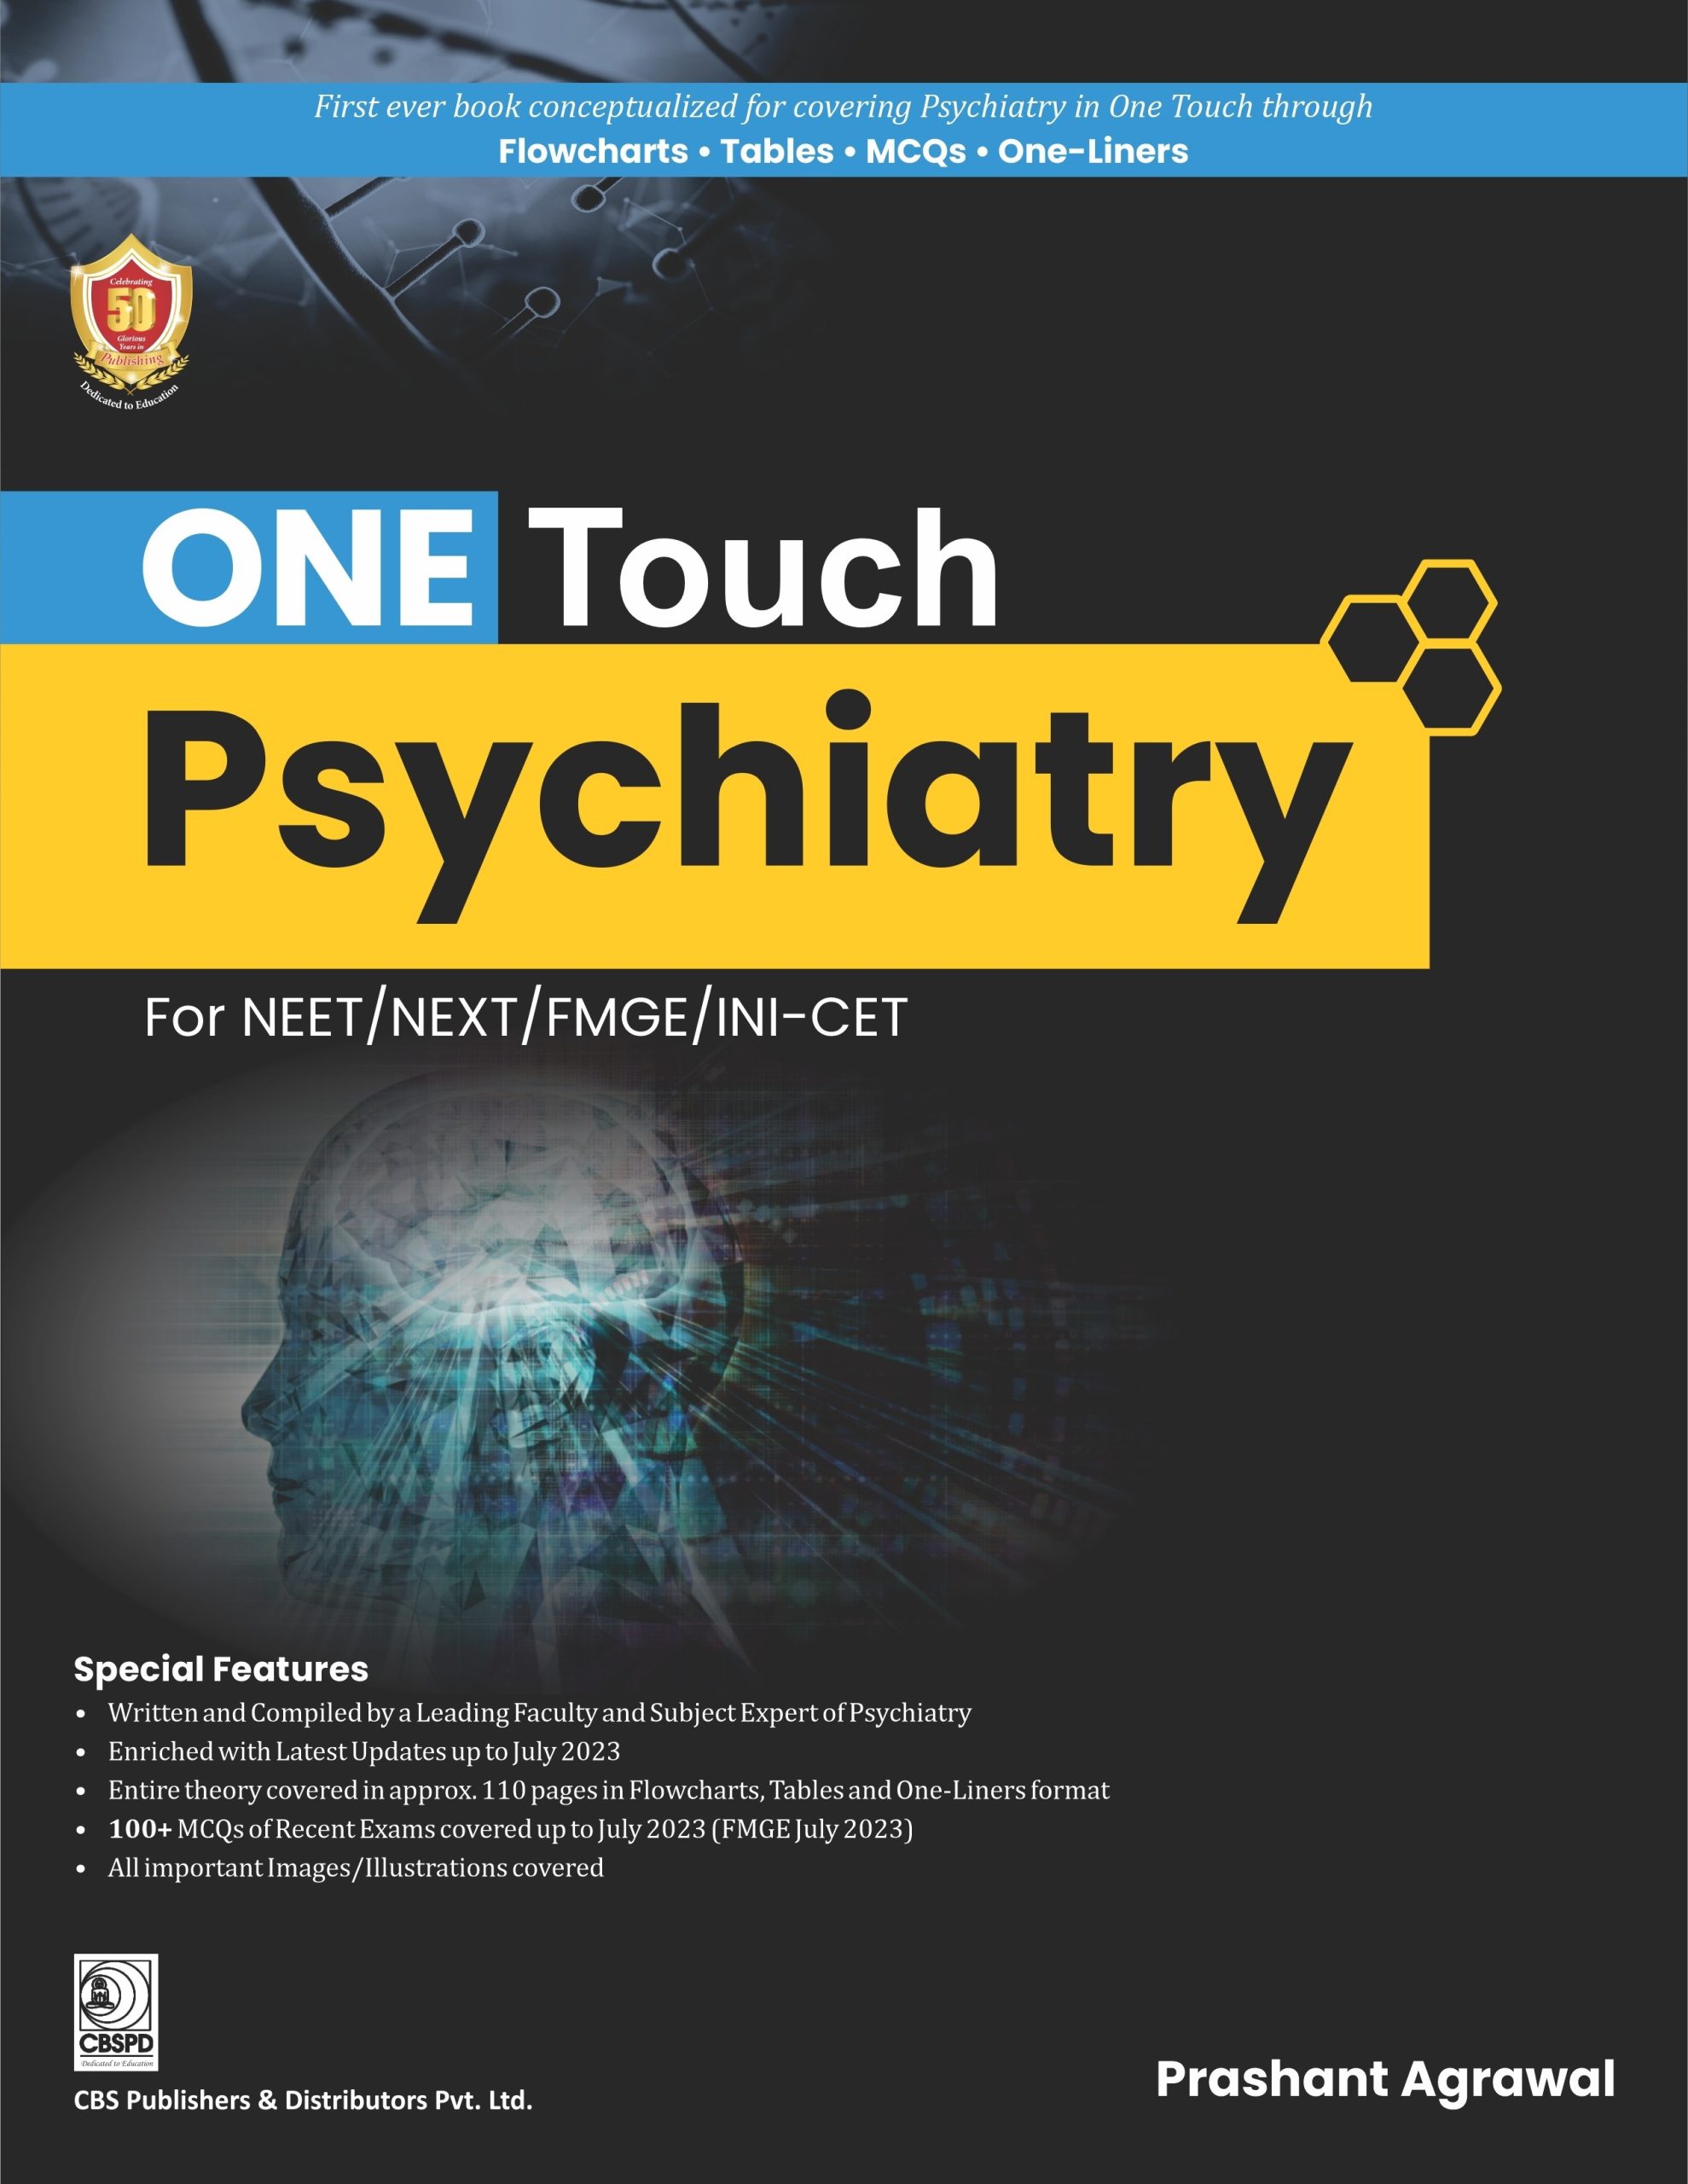 ONE TOUCH PSYCHIATRY For NEET/NEXT/FMGE/INI-CET